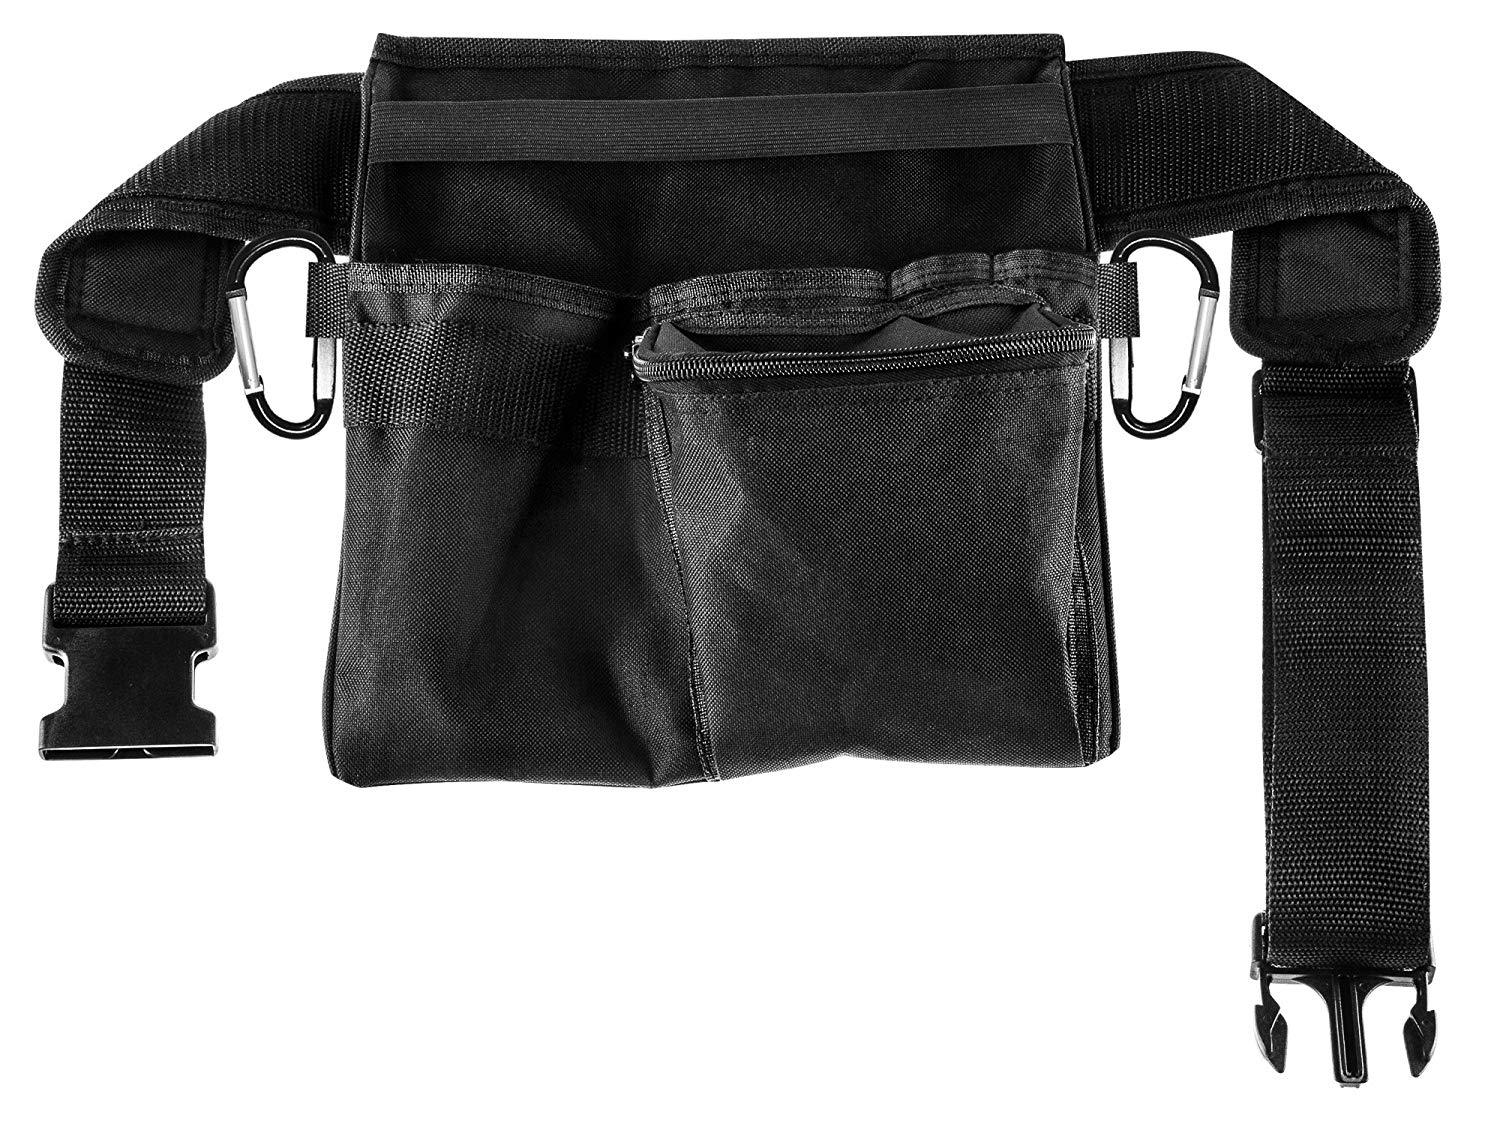 3 Pocket Prospectors Utility Belt & Pouch w/two 3" Carabiner, 600 Denier Nylon Material Bags and Backpacks Detector Pro 